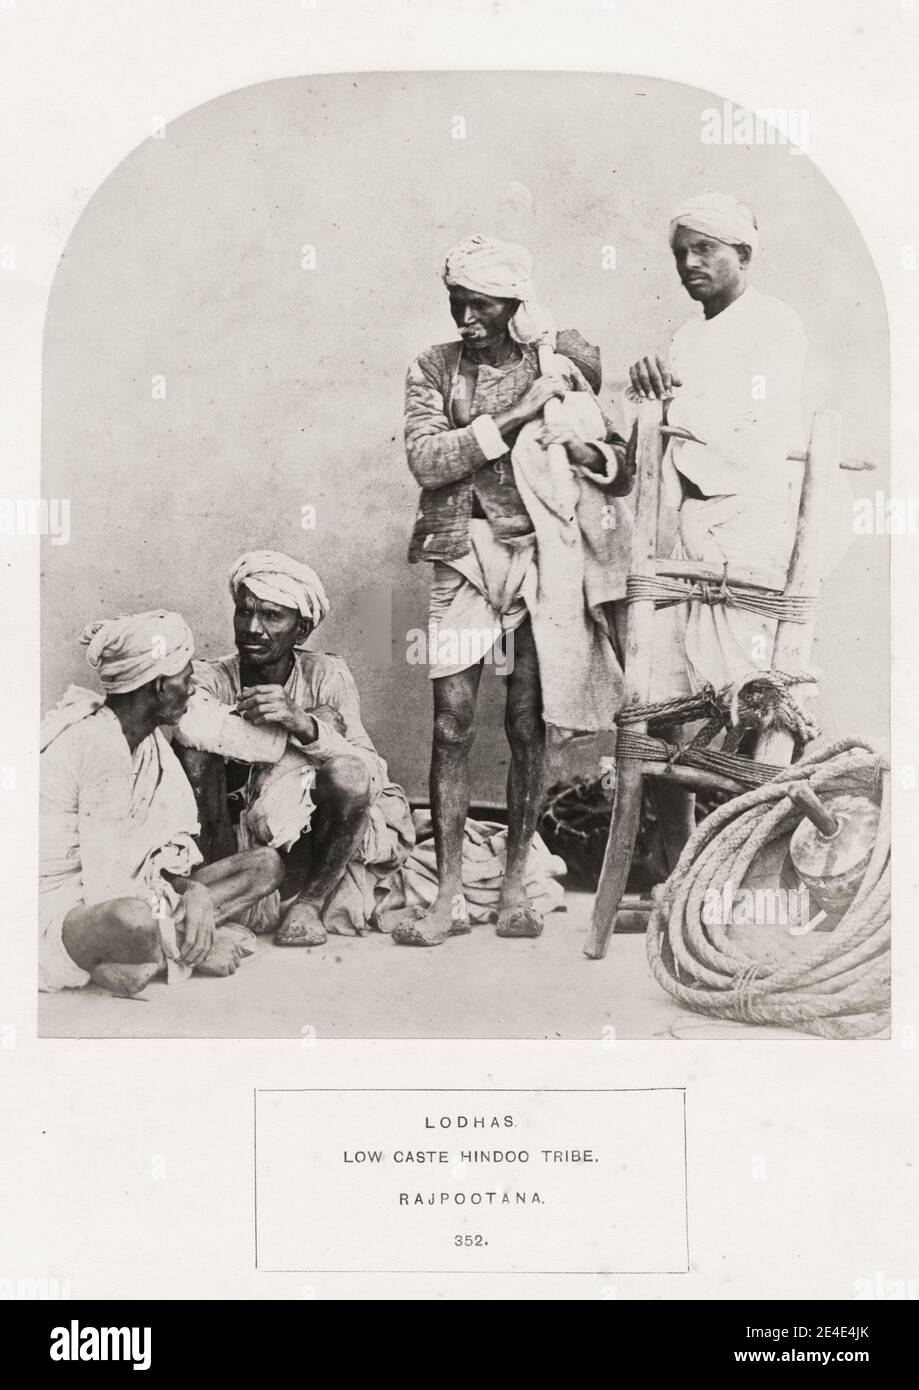 Vintage 19th century photograph: The People of India: A Series of Photographic Illustrations, with Descriptive Letterpress, of the Races and Tribes of Hindustan - published in the 1860s under order of the Viceroy, Lord Canning - Lodhas, low caste Hindoo tribe, Hindu, Rajpootana. Stock Photo